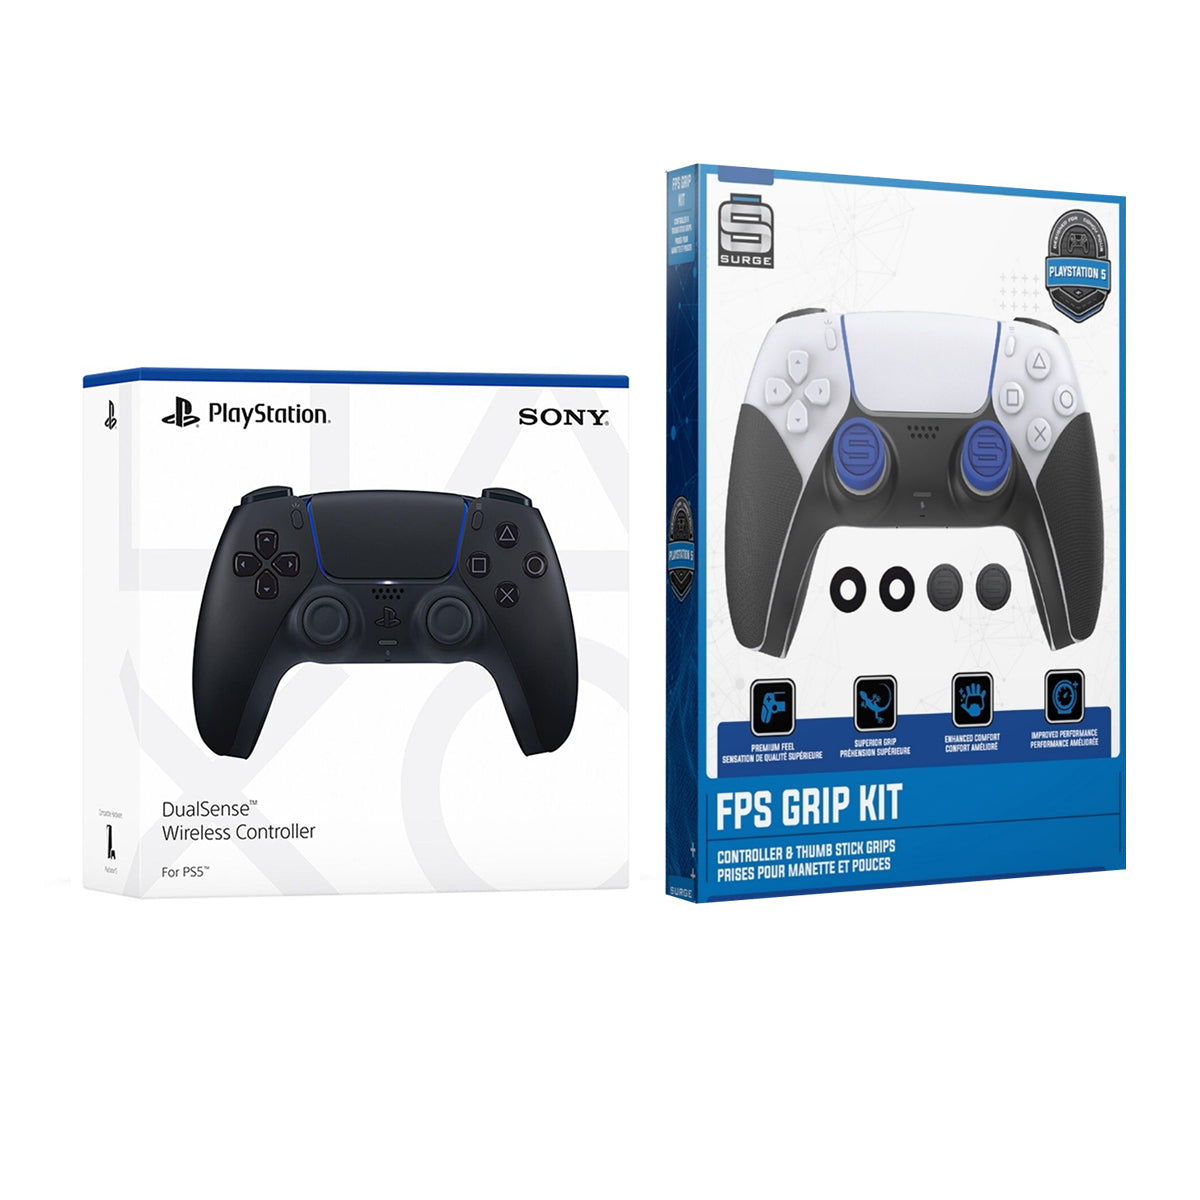 Sony PlayStation 5 DualSense Wireless Controller with FPS Grip Kit Bundle - Midnight Black - Pro-Distributing